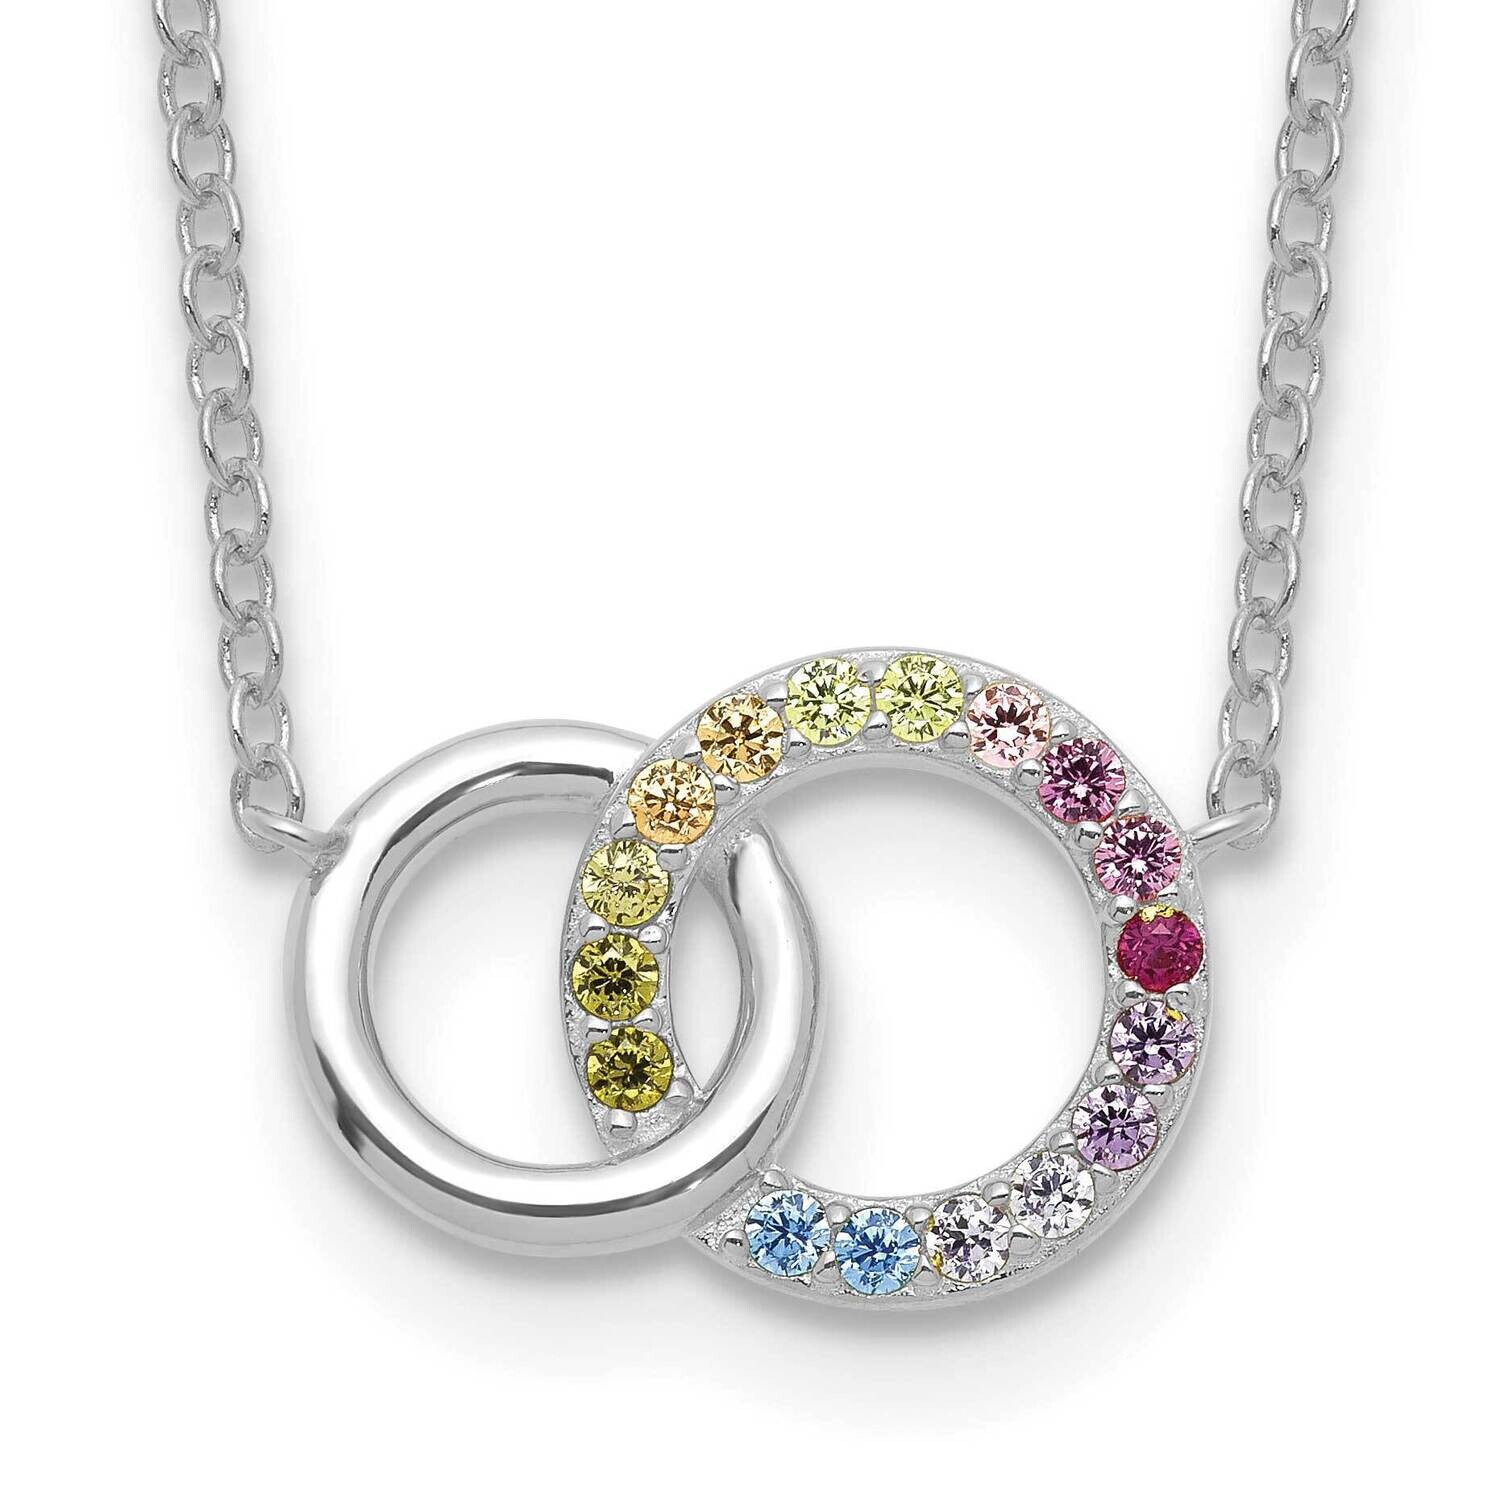 Prizma 16 Inch Colorful CZ Intertwined Circle Necklace 2 Inch Extender Sterling Silver Rhodium-Plated QG5664-16